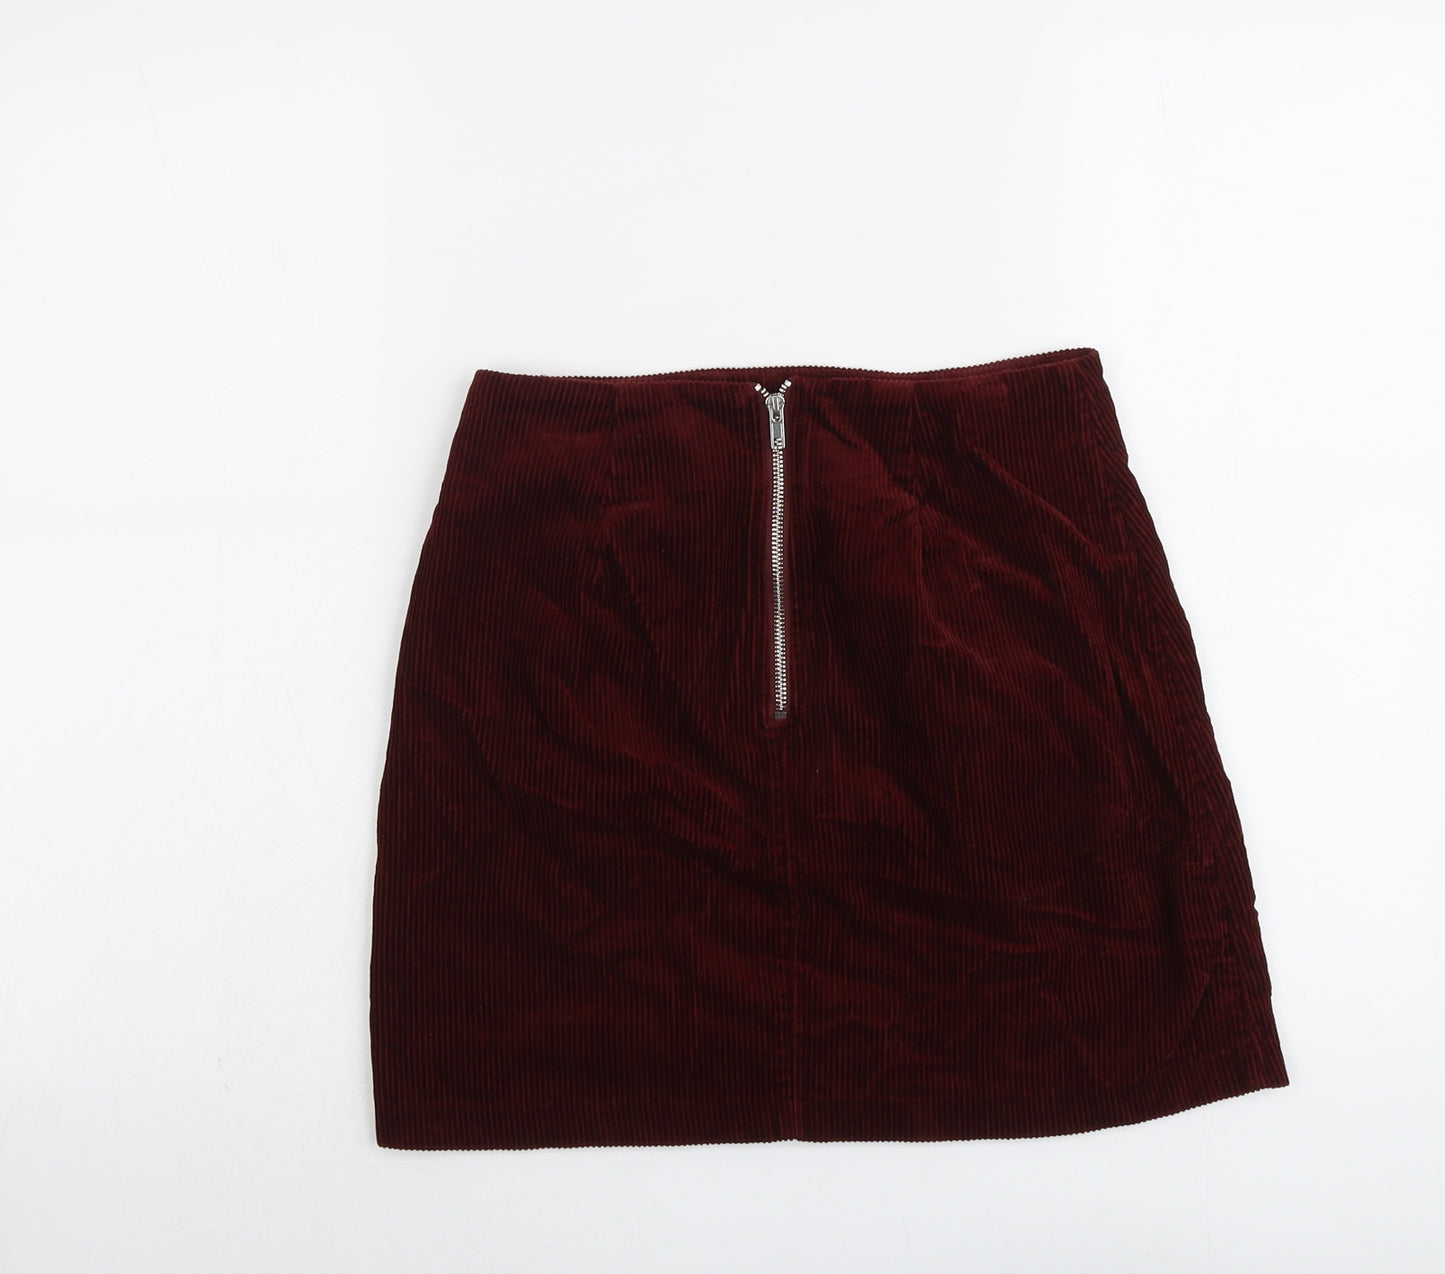 New Look Womens Red Cotton A-Line Skirt Size 8 Zip